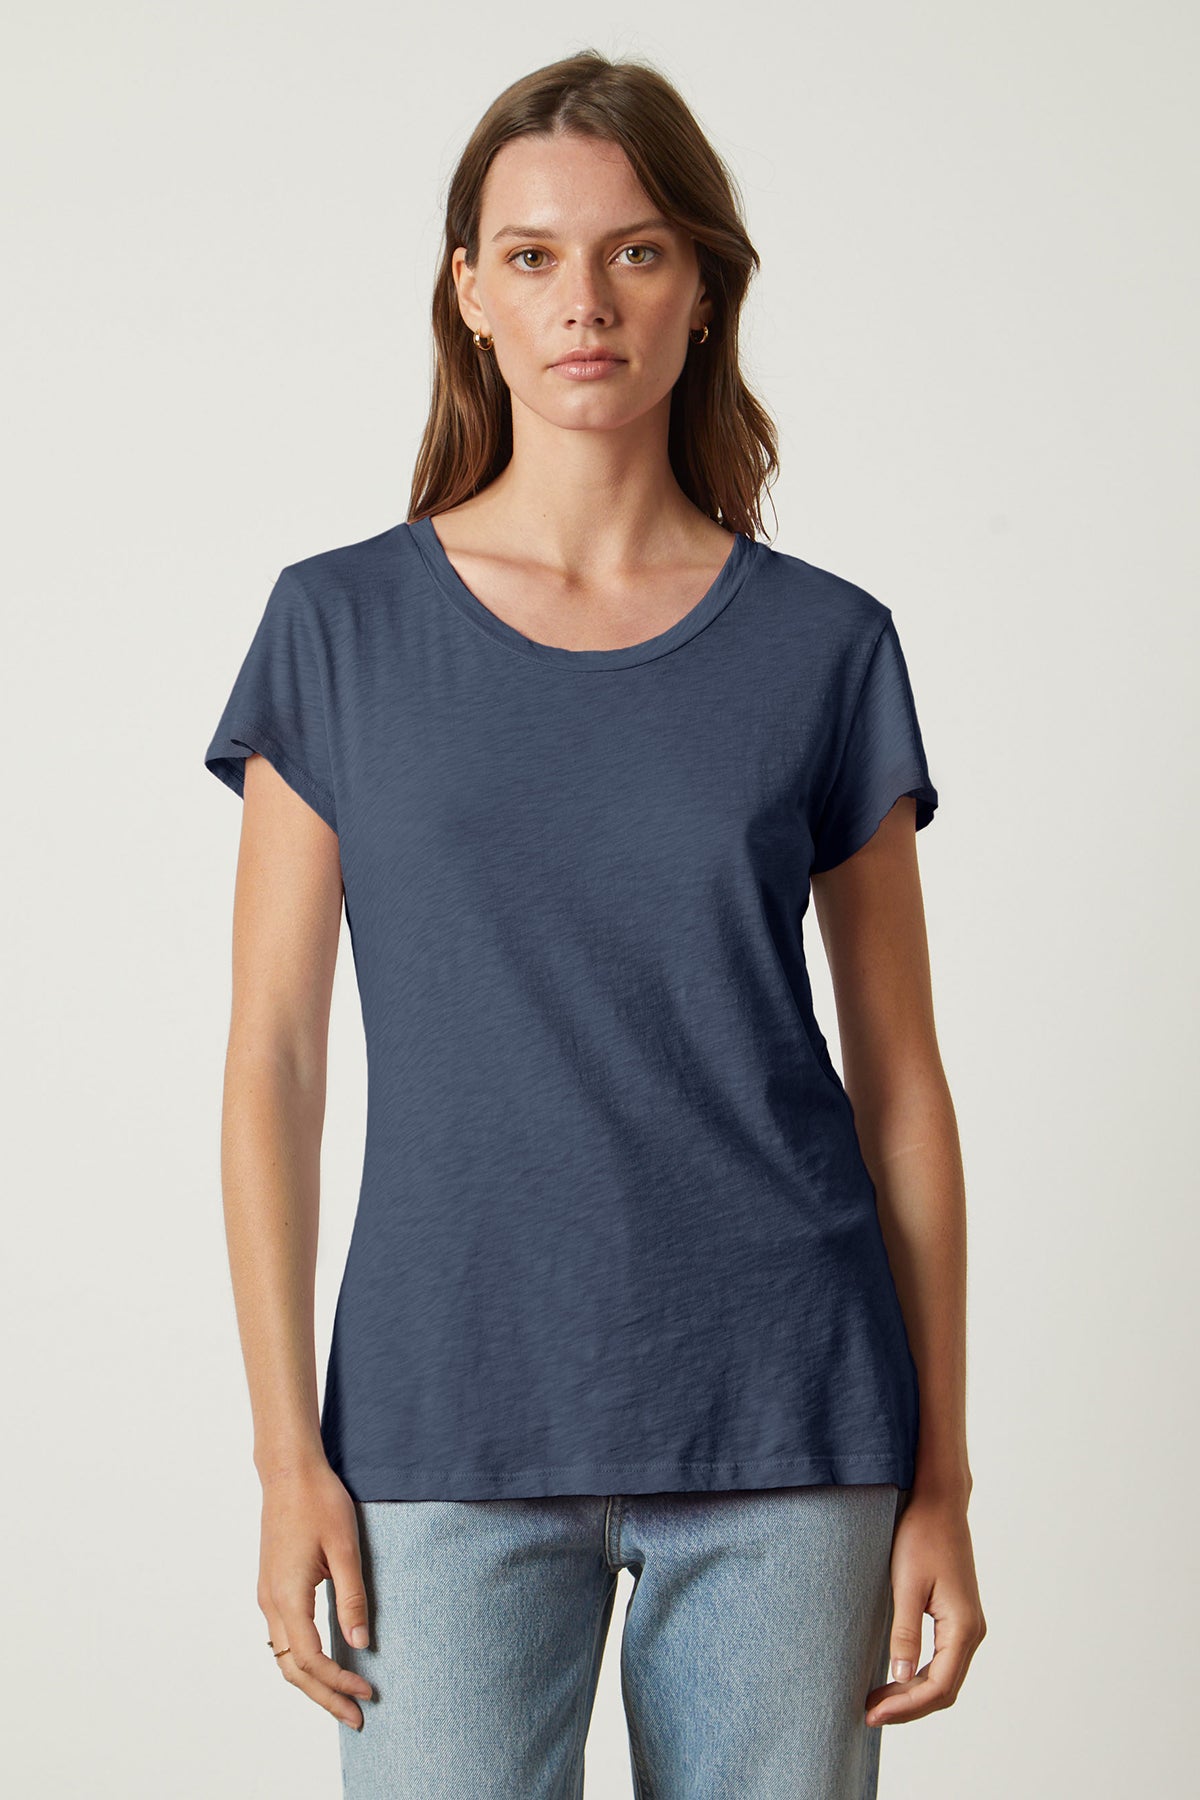   A woman wearing a plain, navy blue ODELIA TEE with a classic crew neckline by Velvet by Graham & Spencer stands against a light grey background. She has straight, shoulder-length brown hair and is wearing light blue jeans. This wardrobe essential is made from premium cotton, perfect for any casual occasion. 